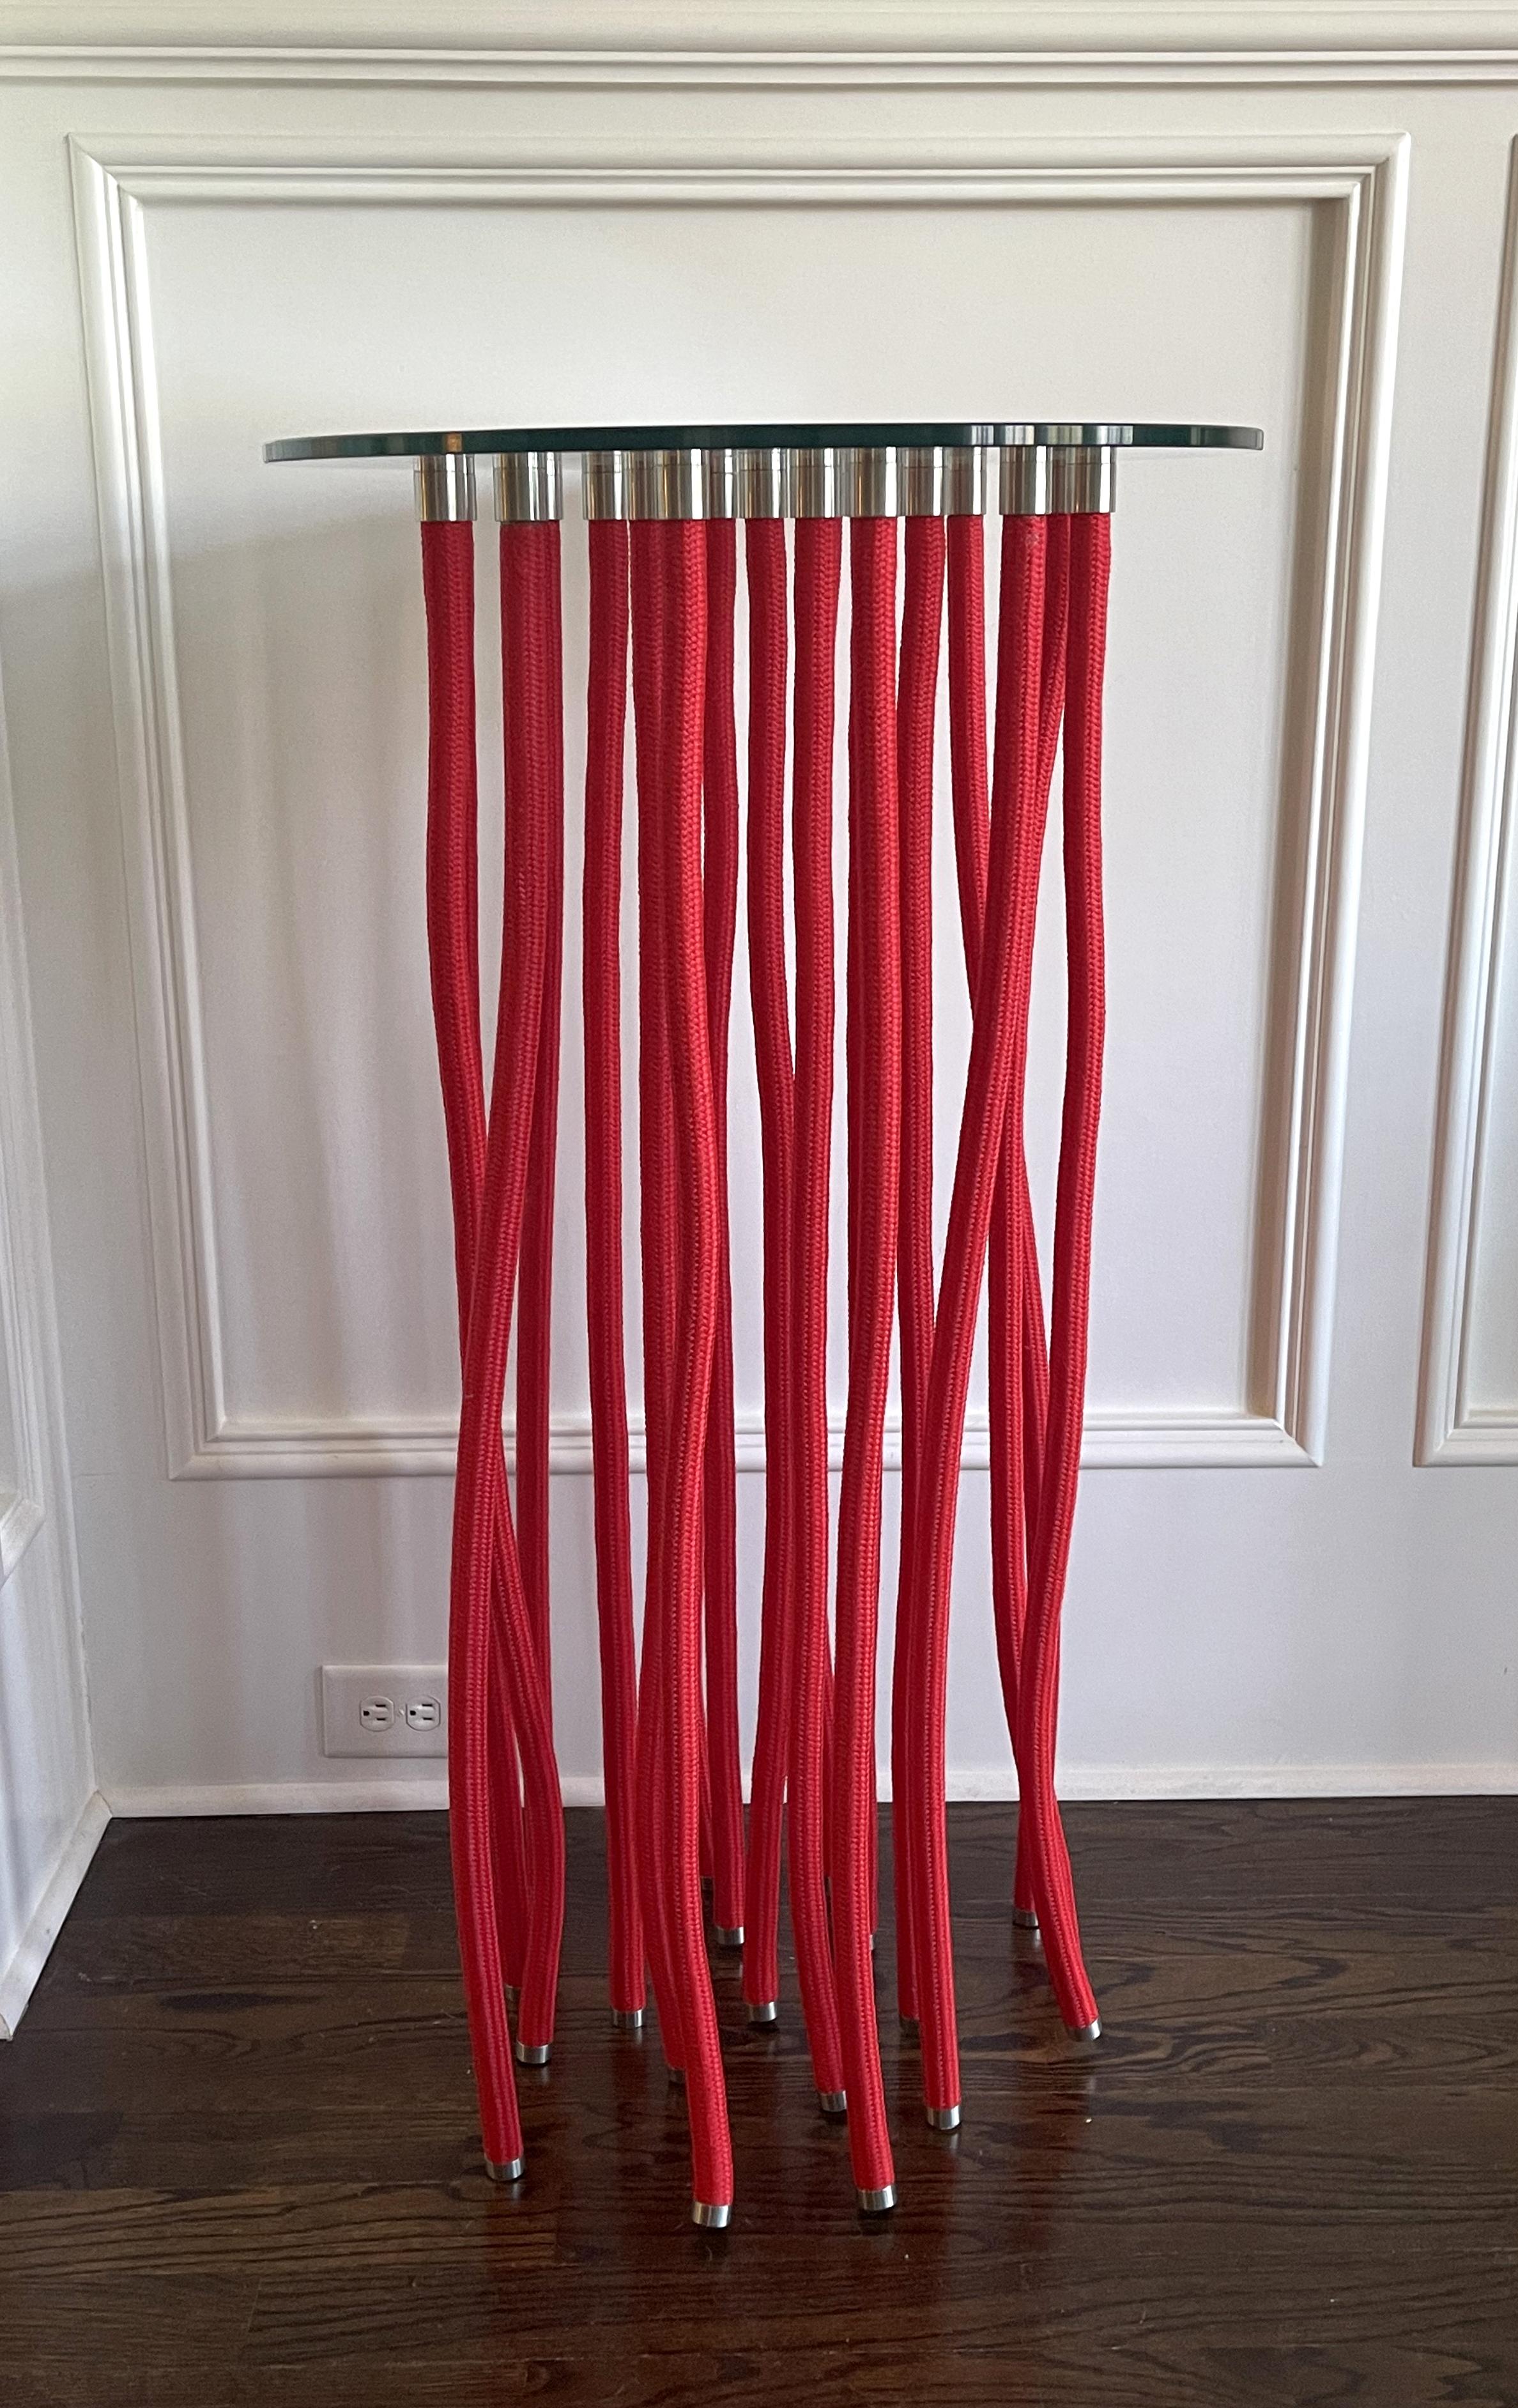 A tall red ORG table designed by Fabio Novembre (Italian, born 1967) in 2001 for Cappellini. Made of glass top supported by polypropylene rope-covered steel with exposed stainless-steel fitting. The table appears floating on the air due to the